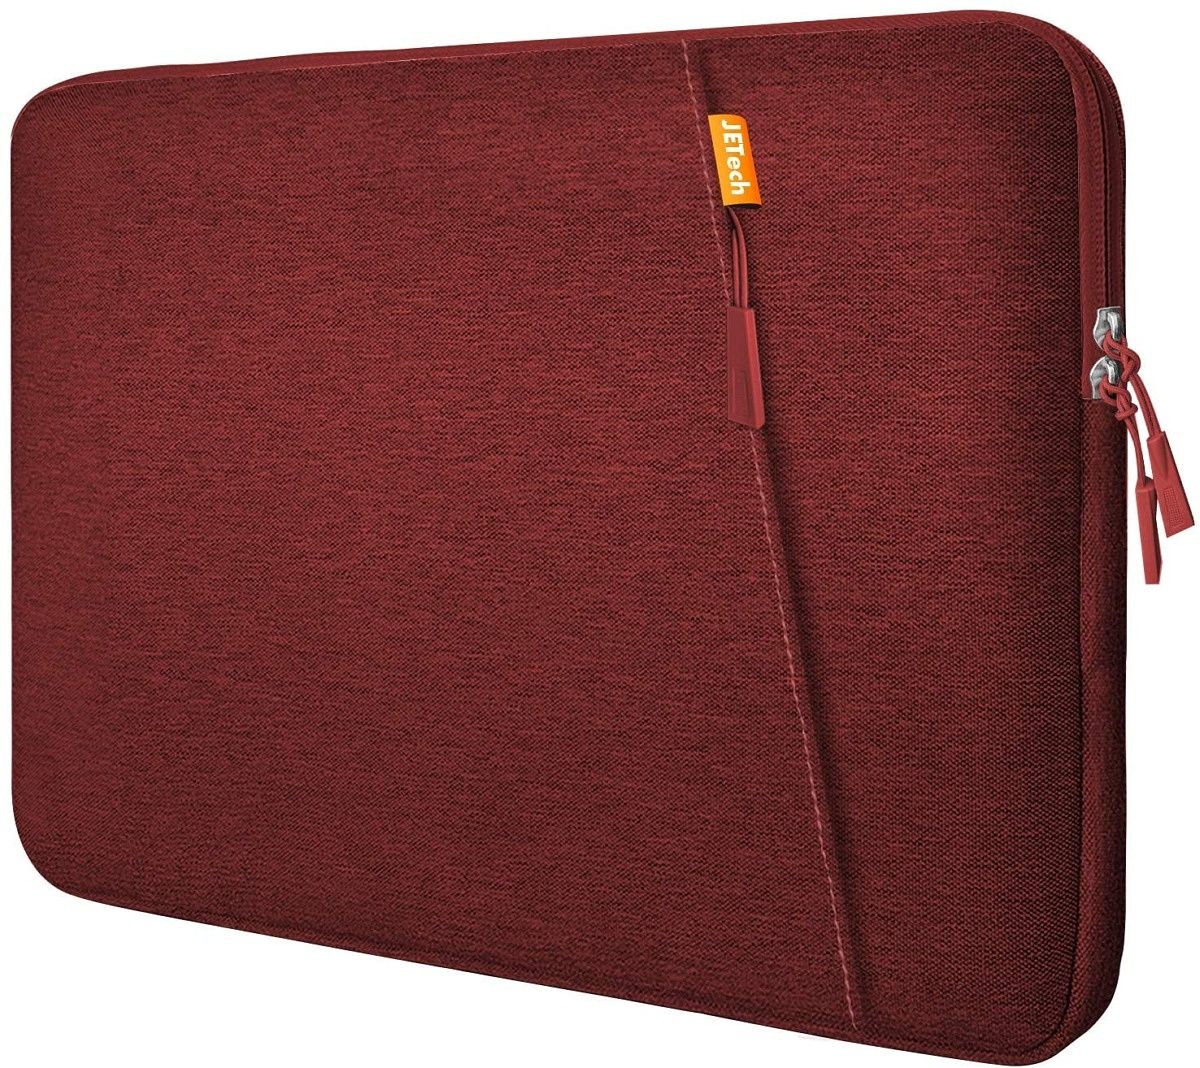 This waterproof, shock-resistant sleeve from JETech protects your Surface Pro 8 accidental spills and bumps. It's available in nine different colors and features a basic, unsophisticated design.